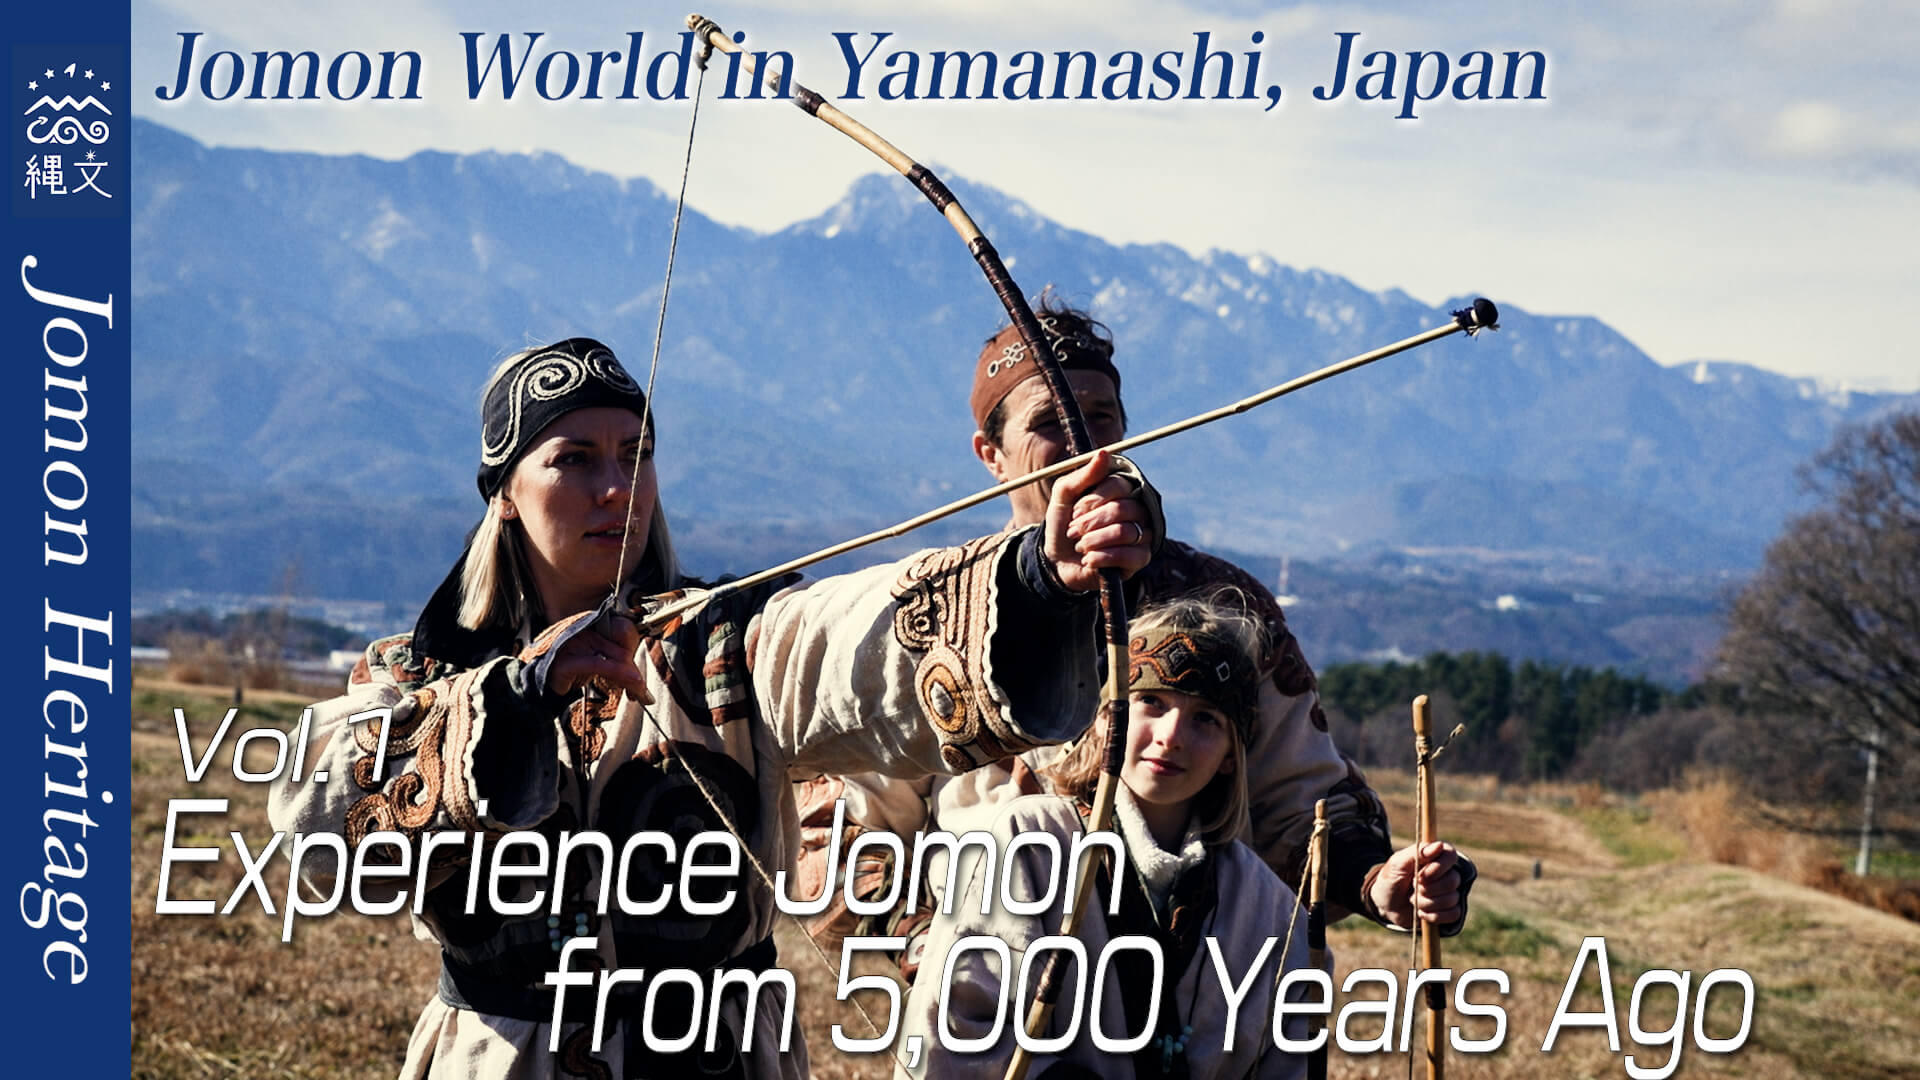 Vol.1 Experience Jomon from 5000 Years Ago